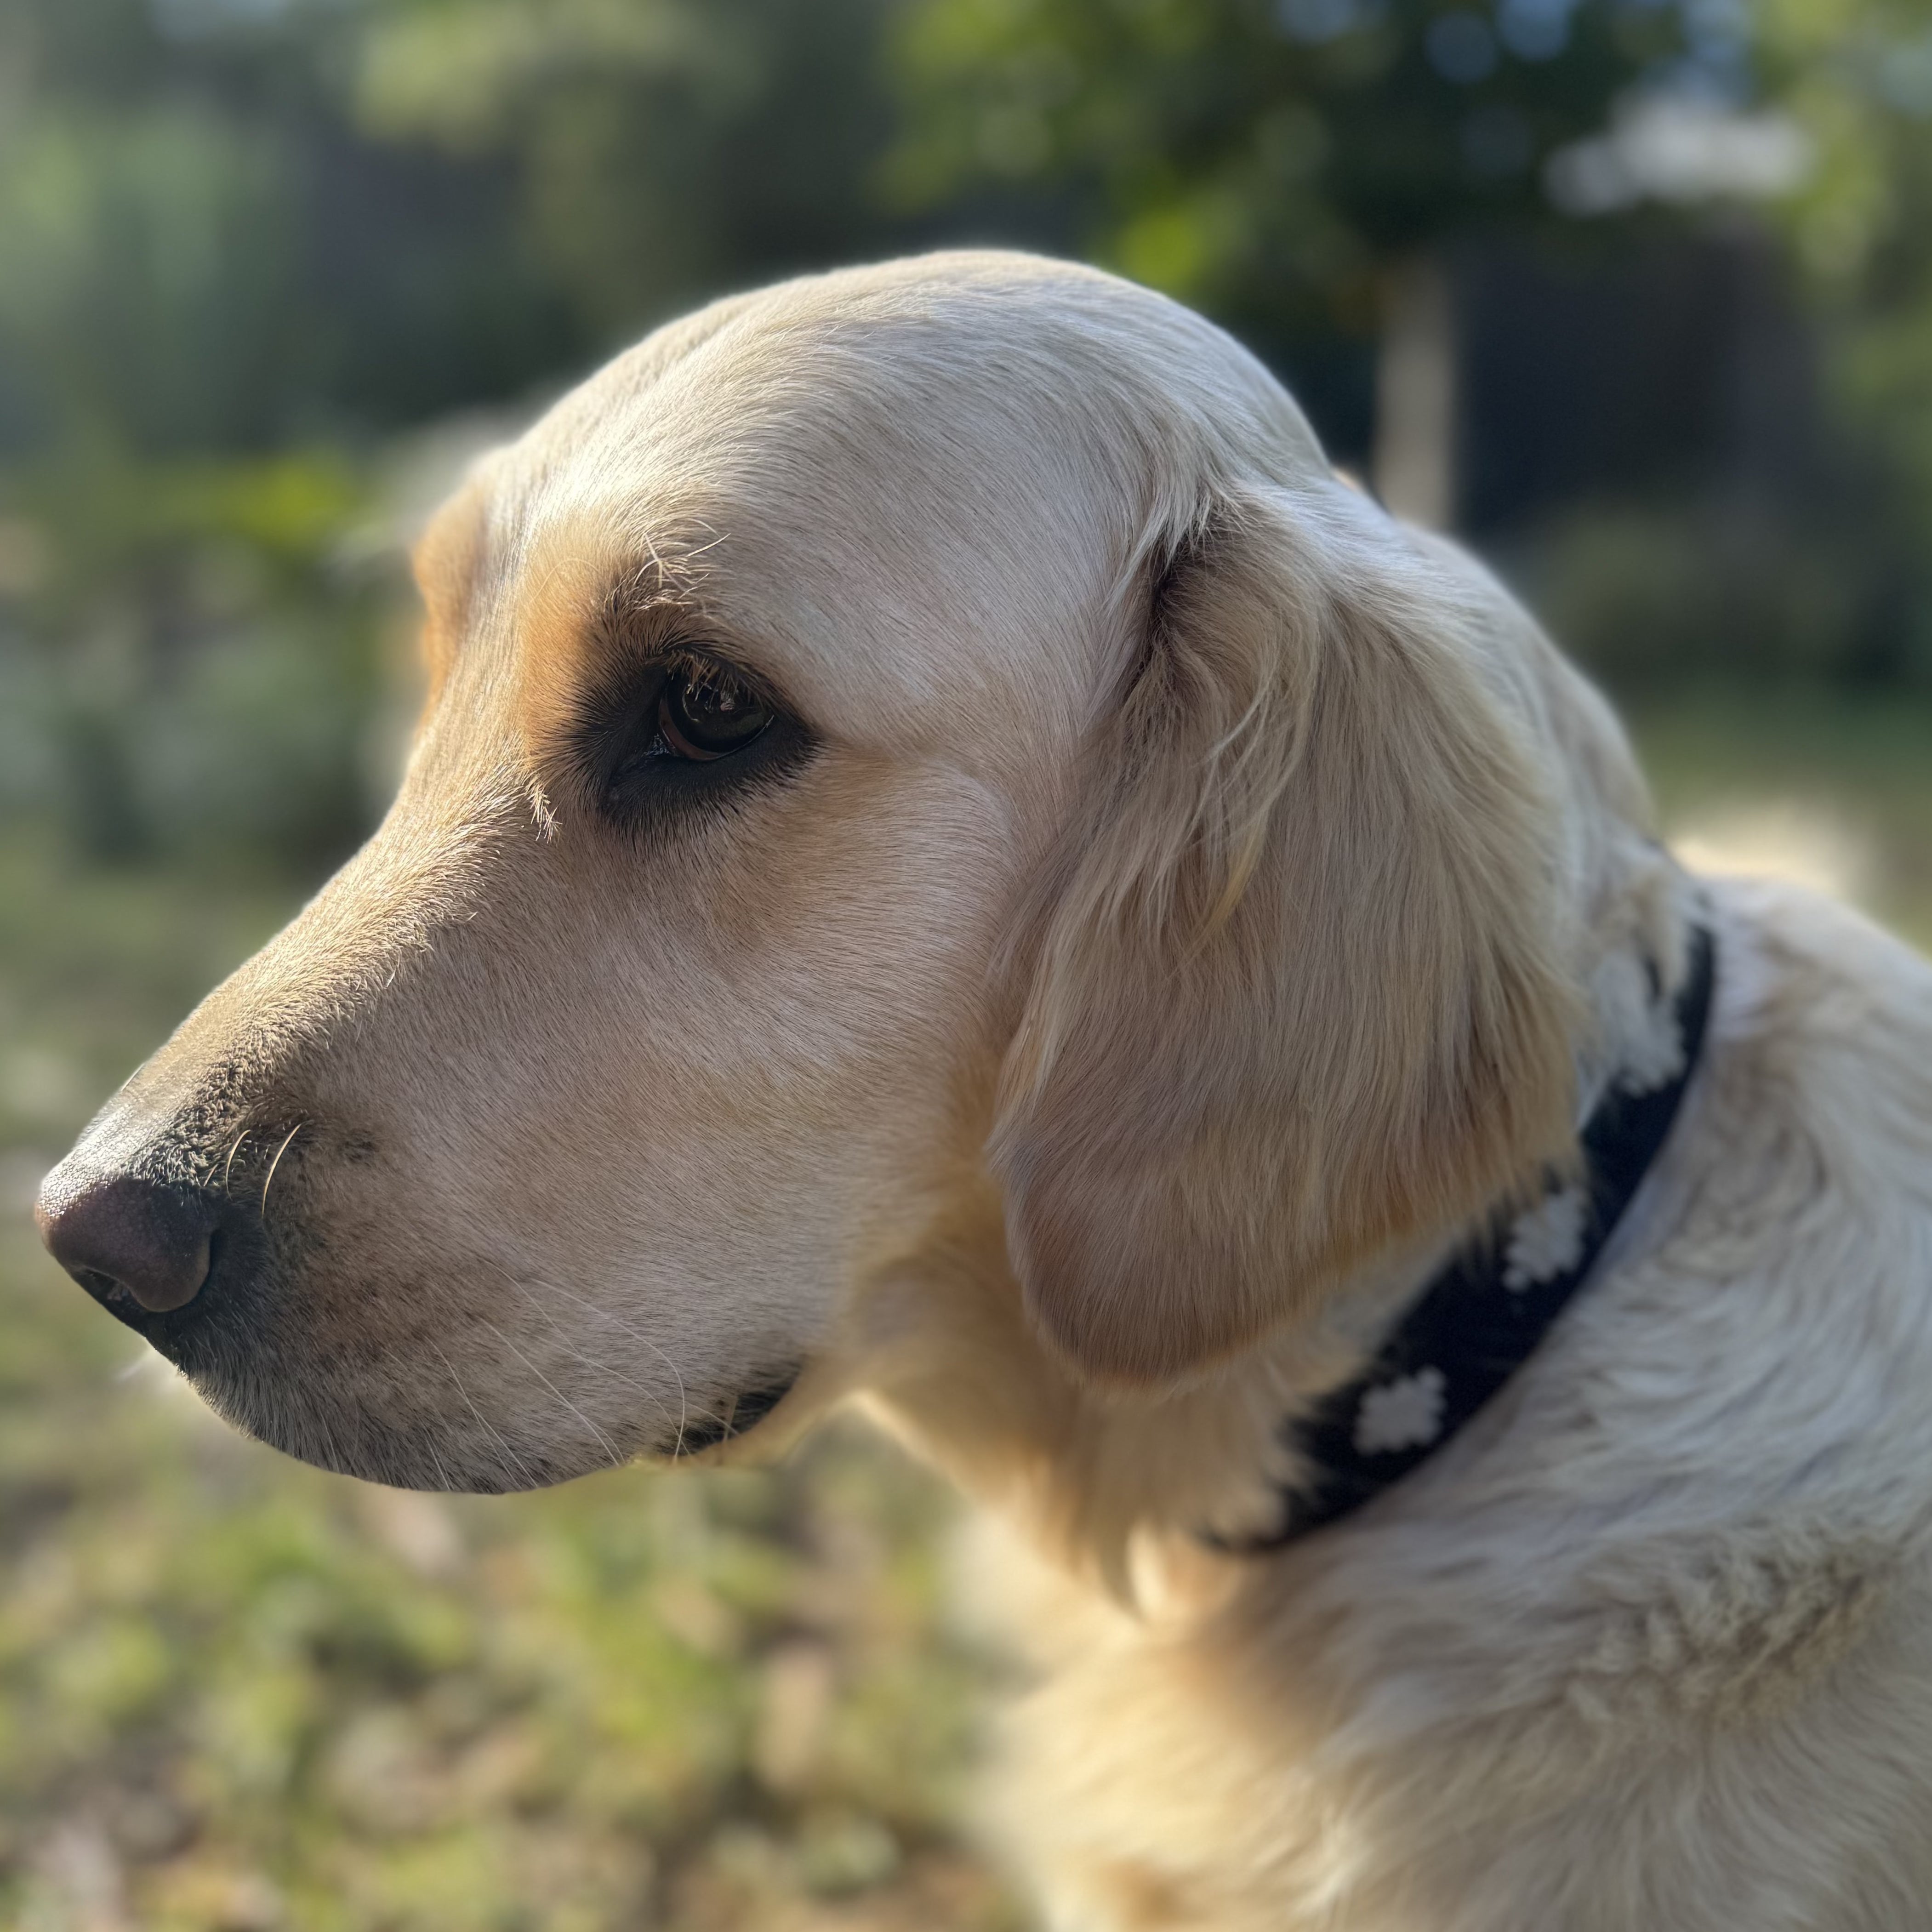 A close-up of a golden retriever dog facing left, with soft sunlight illuminating its fur. The dog wears a handmade Polo Collar - Magpie by Georgie Paws, crafted from buffalo leather, adorned with white paw prints. The background is slightly blurred, showing a mix of greenery and trees. The overall scene is calm and peaceful.